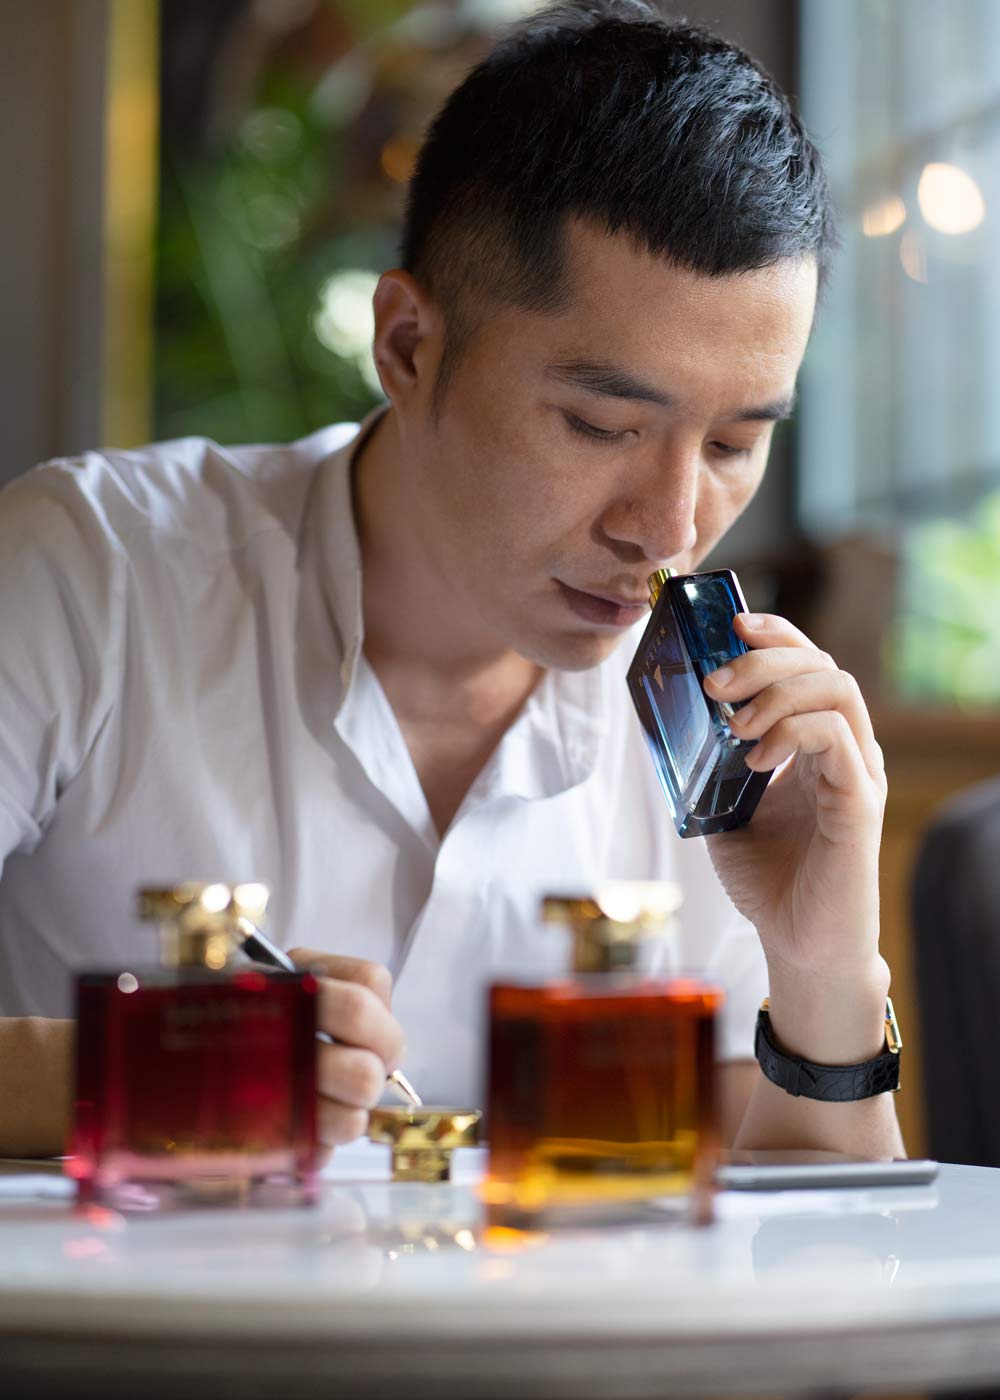 Entrepreneur Eric Tran and the journey to create a unique scent